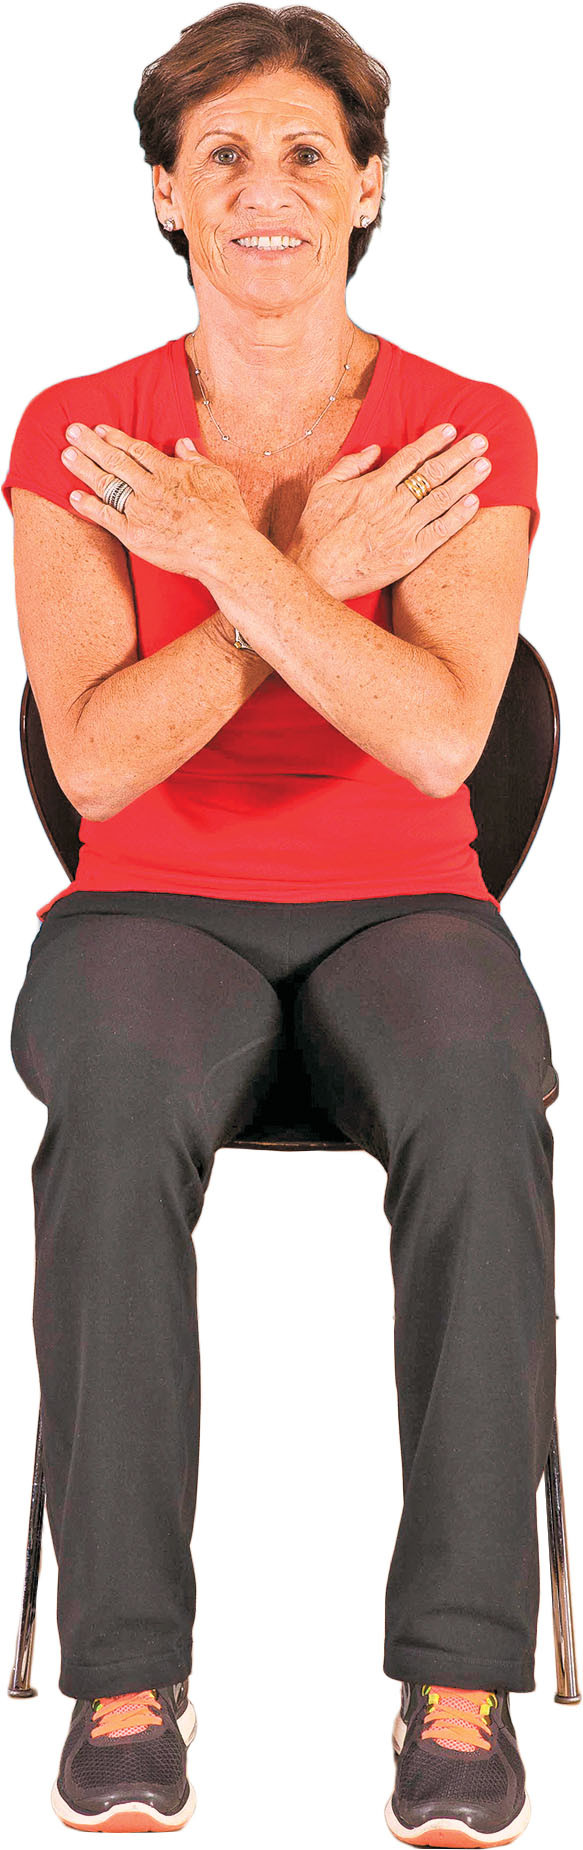 Image of a woman doing sit-to-stand exercise Step 1: Sitting on a chair with her arms across her chest